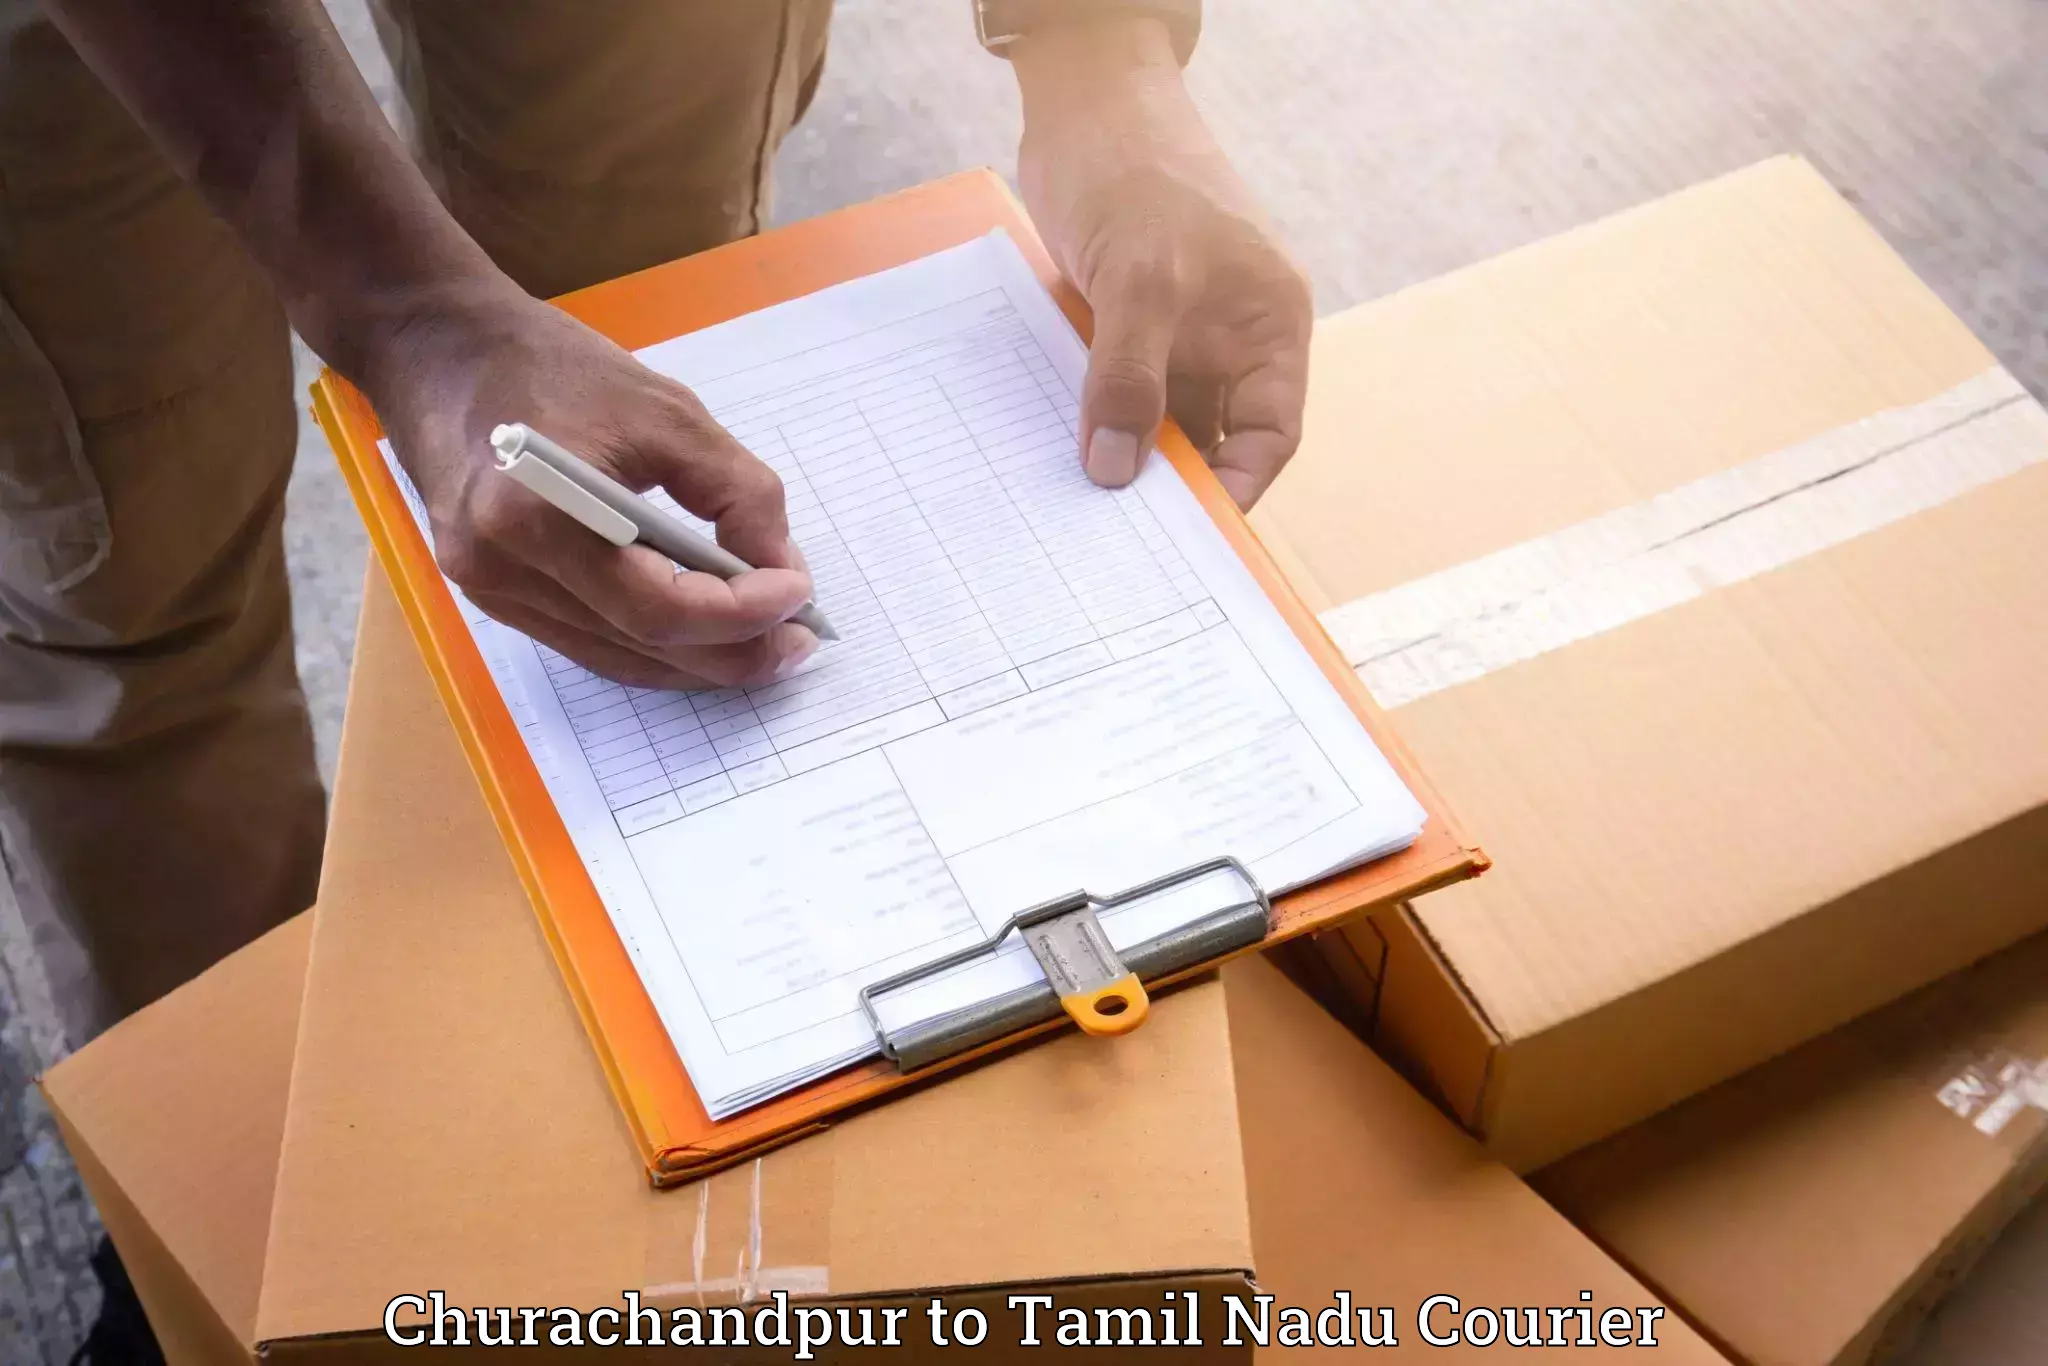 Home goods moving company Churachandpur to Meenakshi Academy of Higher Education and Research Chennai